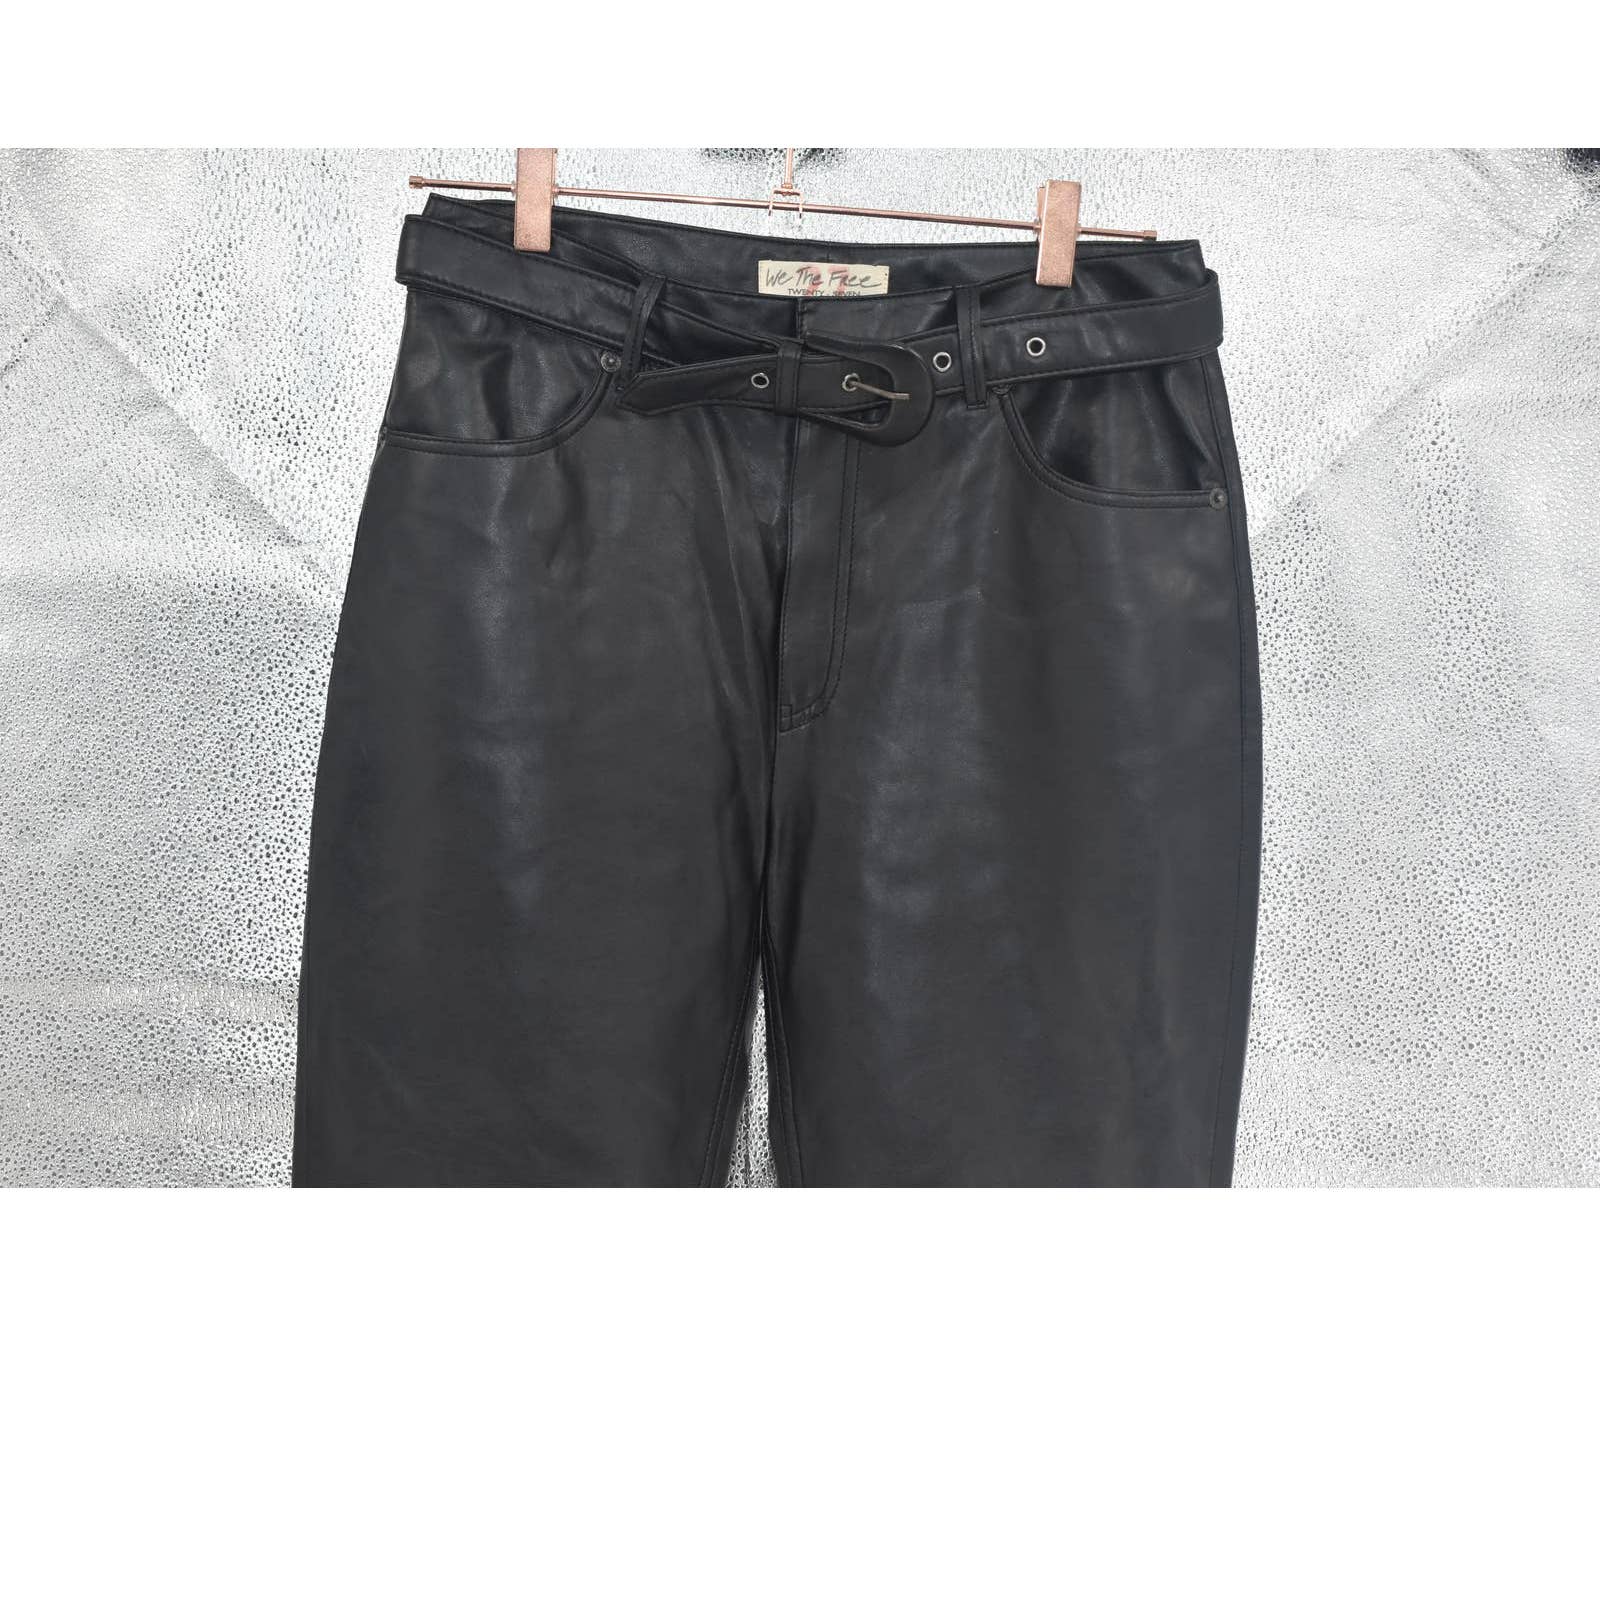 Free People We the Free Vegan Leather Belted Pants - 27